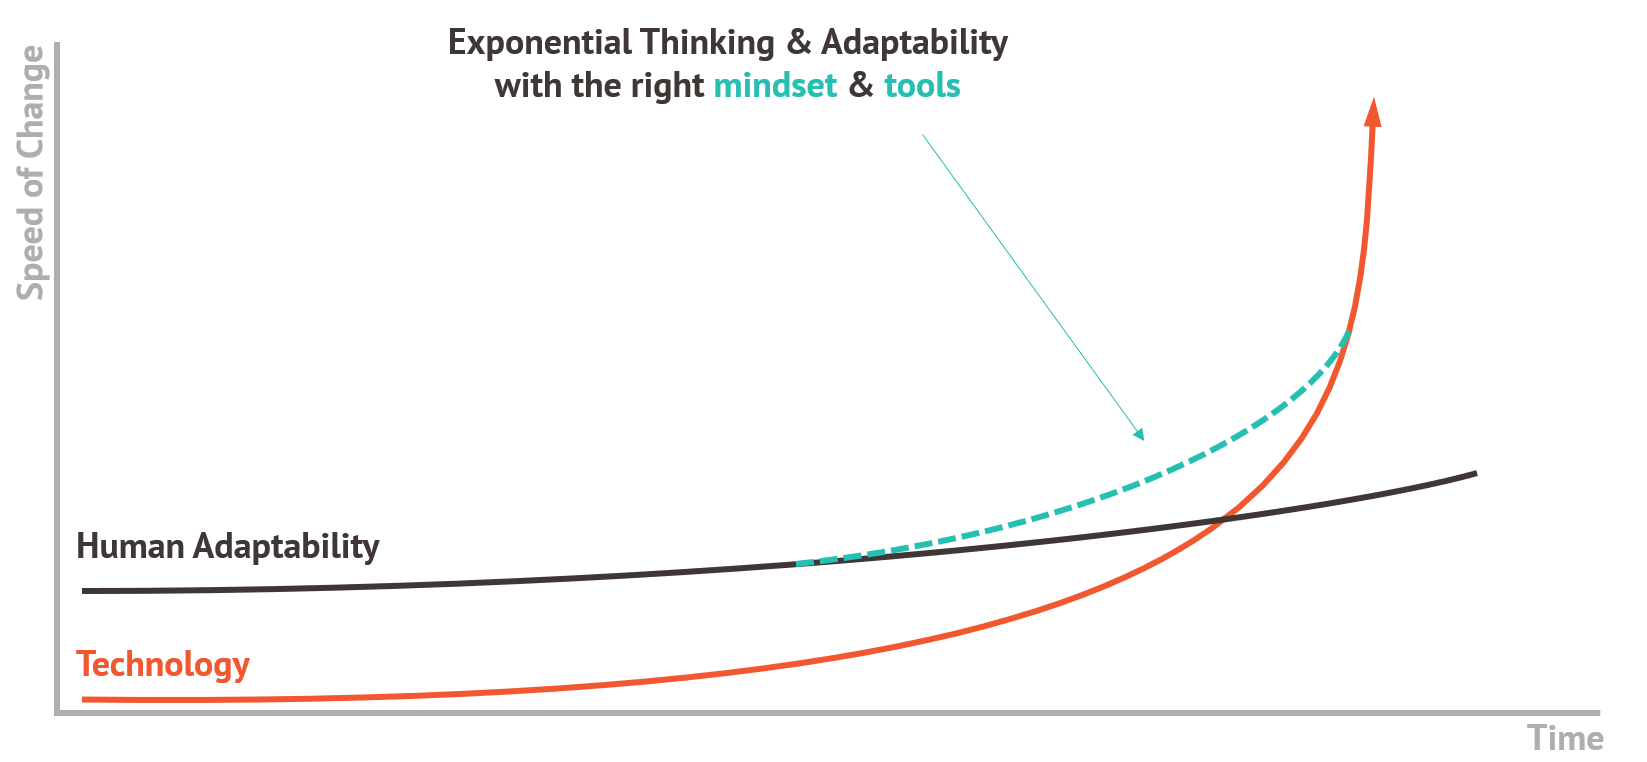 Figure 6 Adaptability and exponential thinking with the right mindset and tools